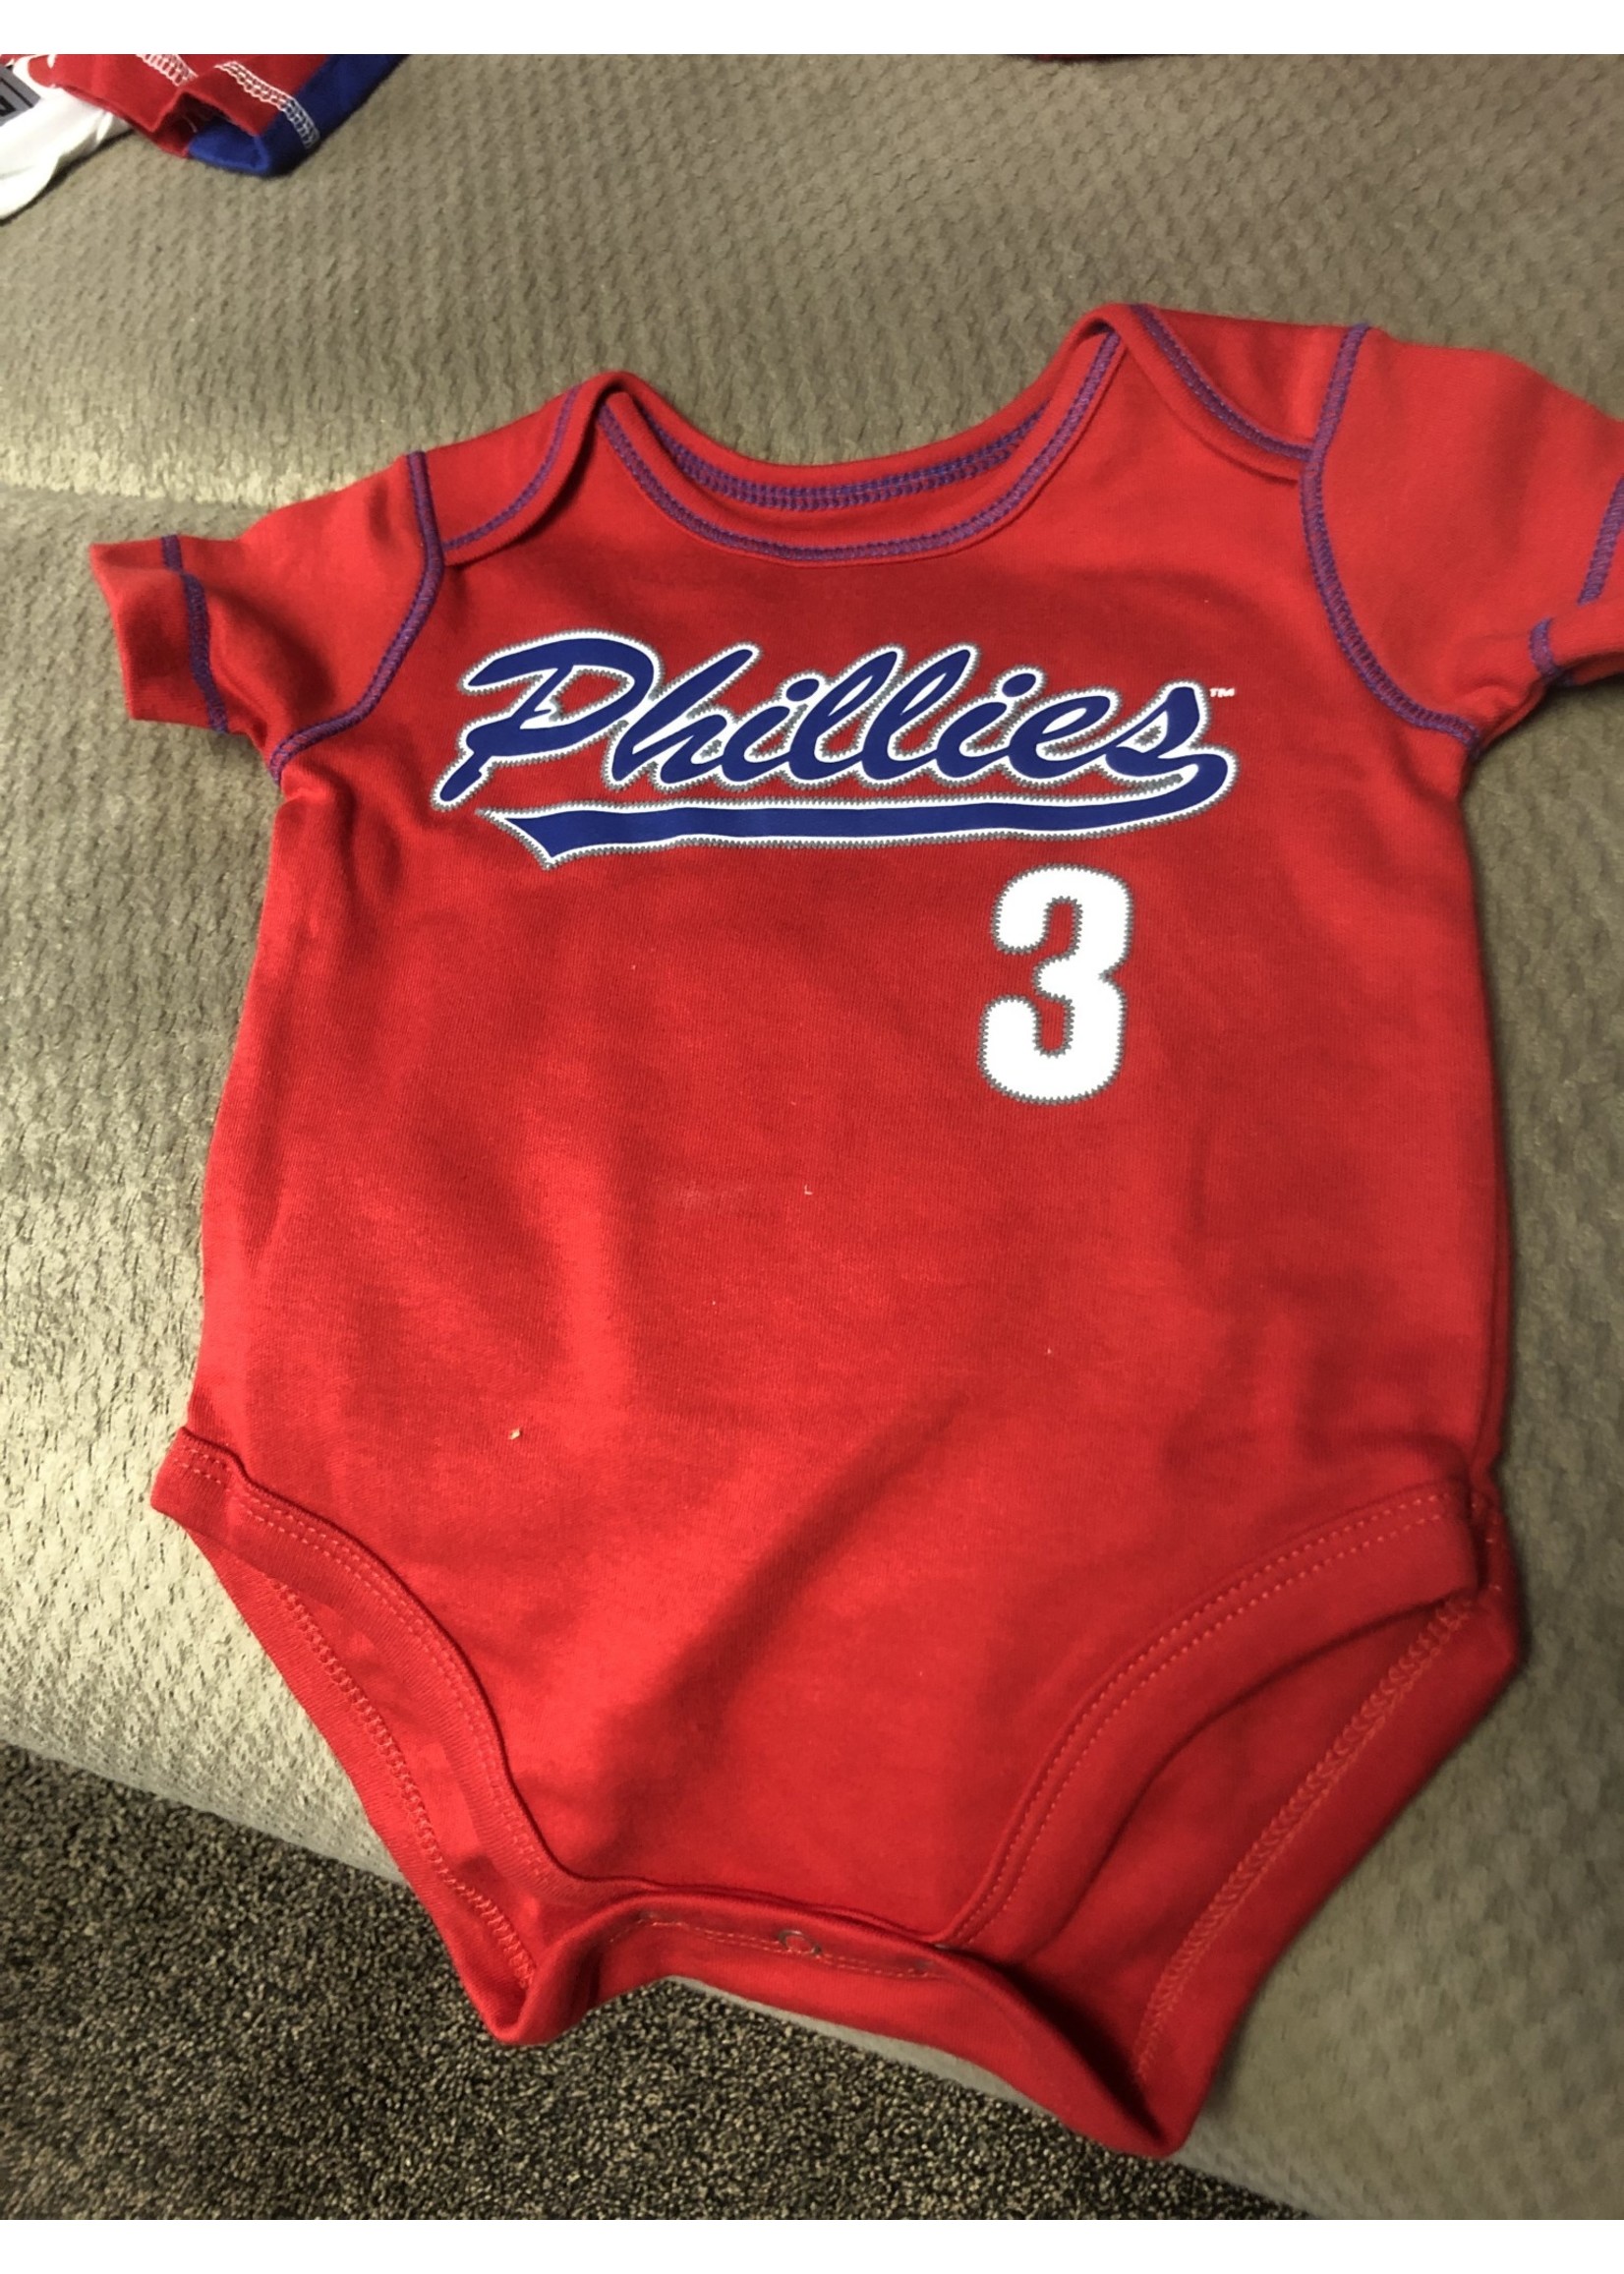 Phillies Onesie Baby and Toddler Phillies Gear 